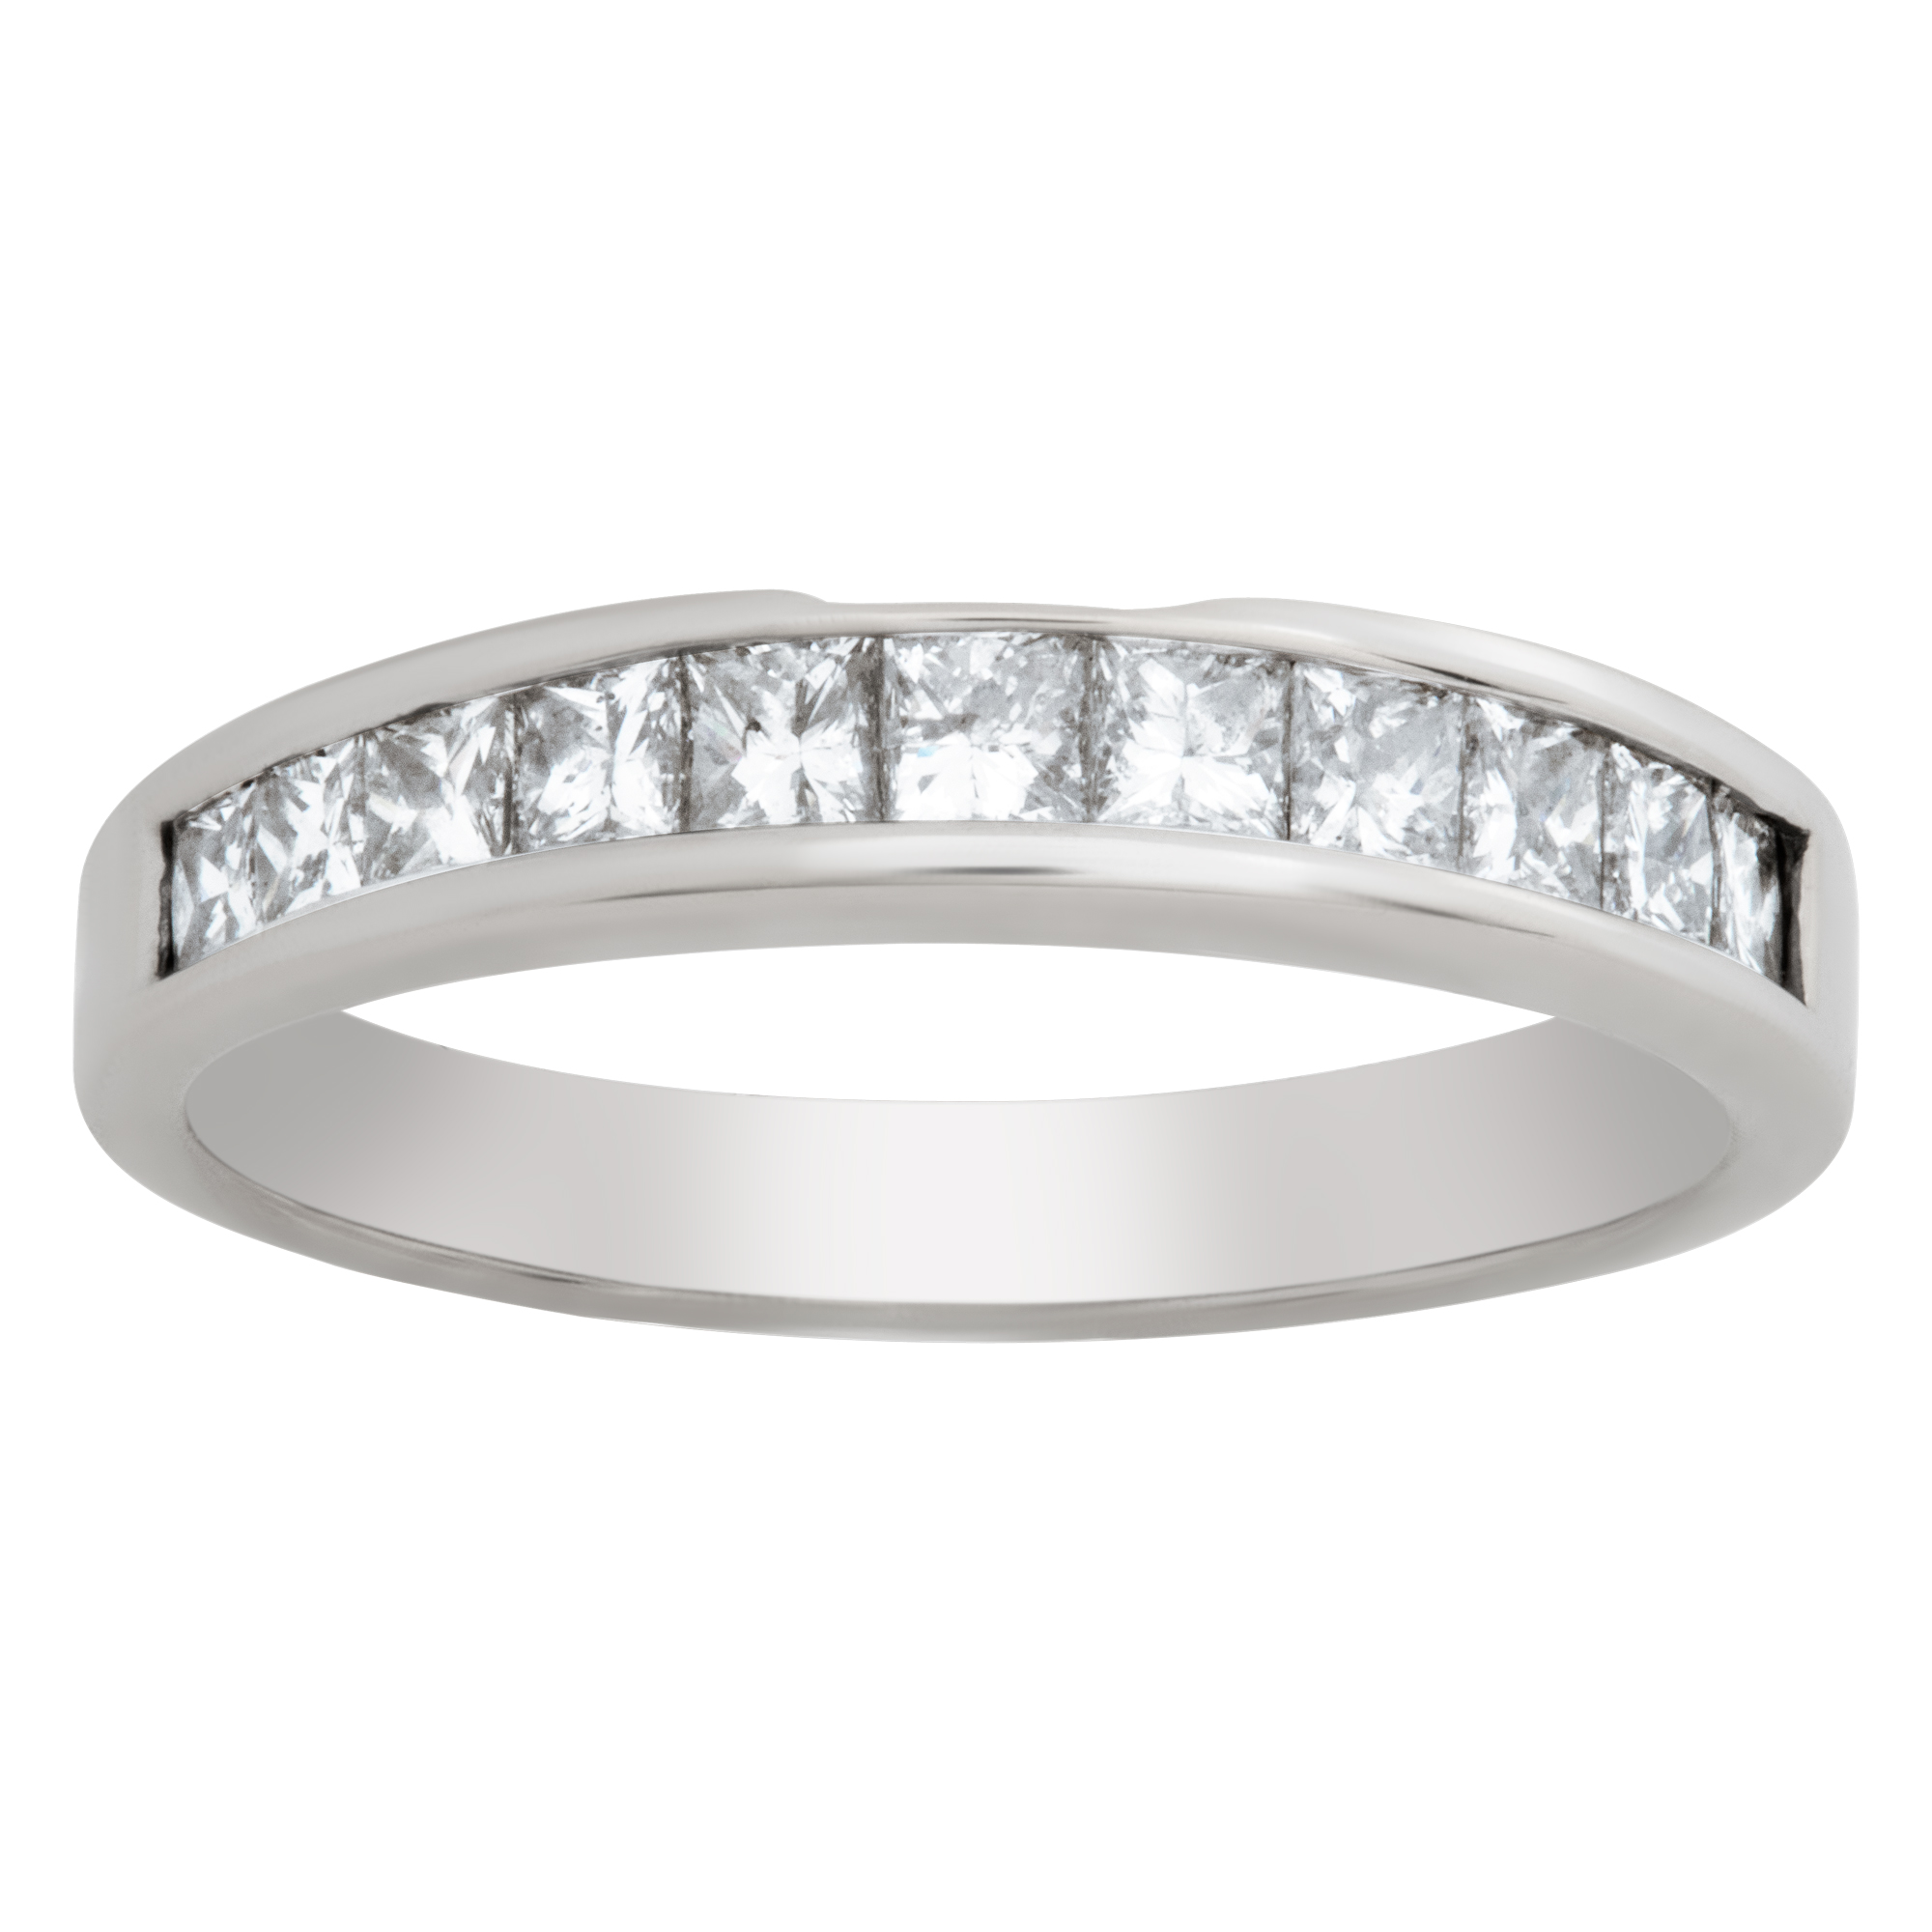 Diamond Semi Eternity Band and Ring in elegant 14k white gold with app. 1 carat in princess cut diamonds. Size 8.